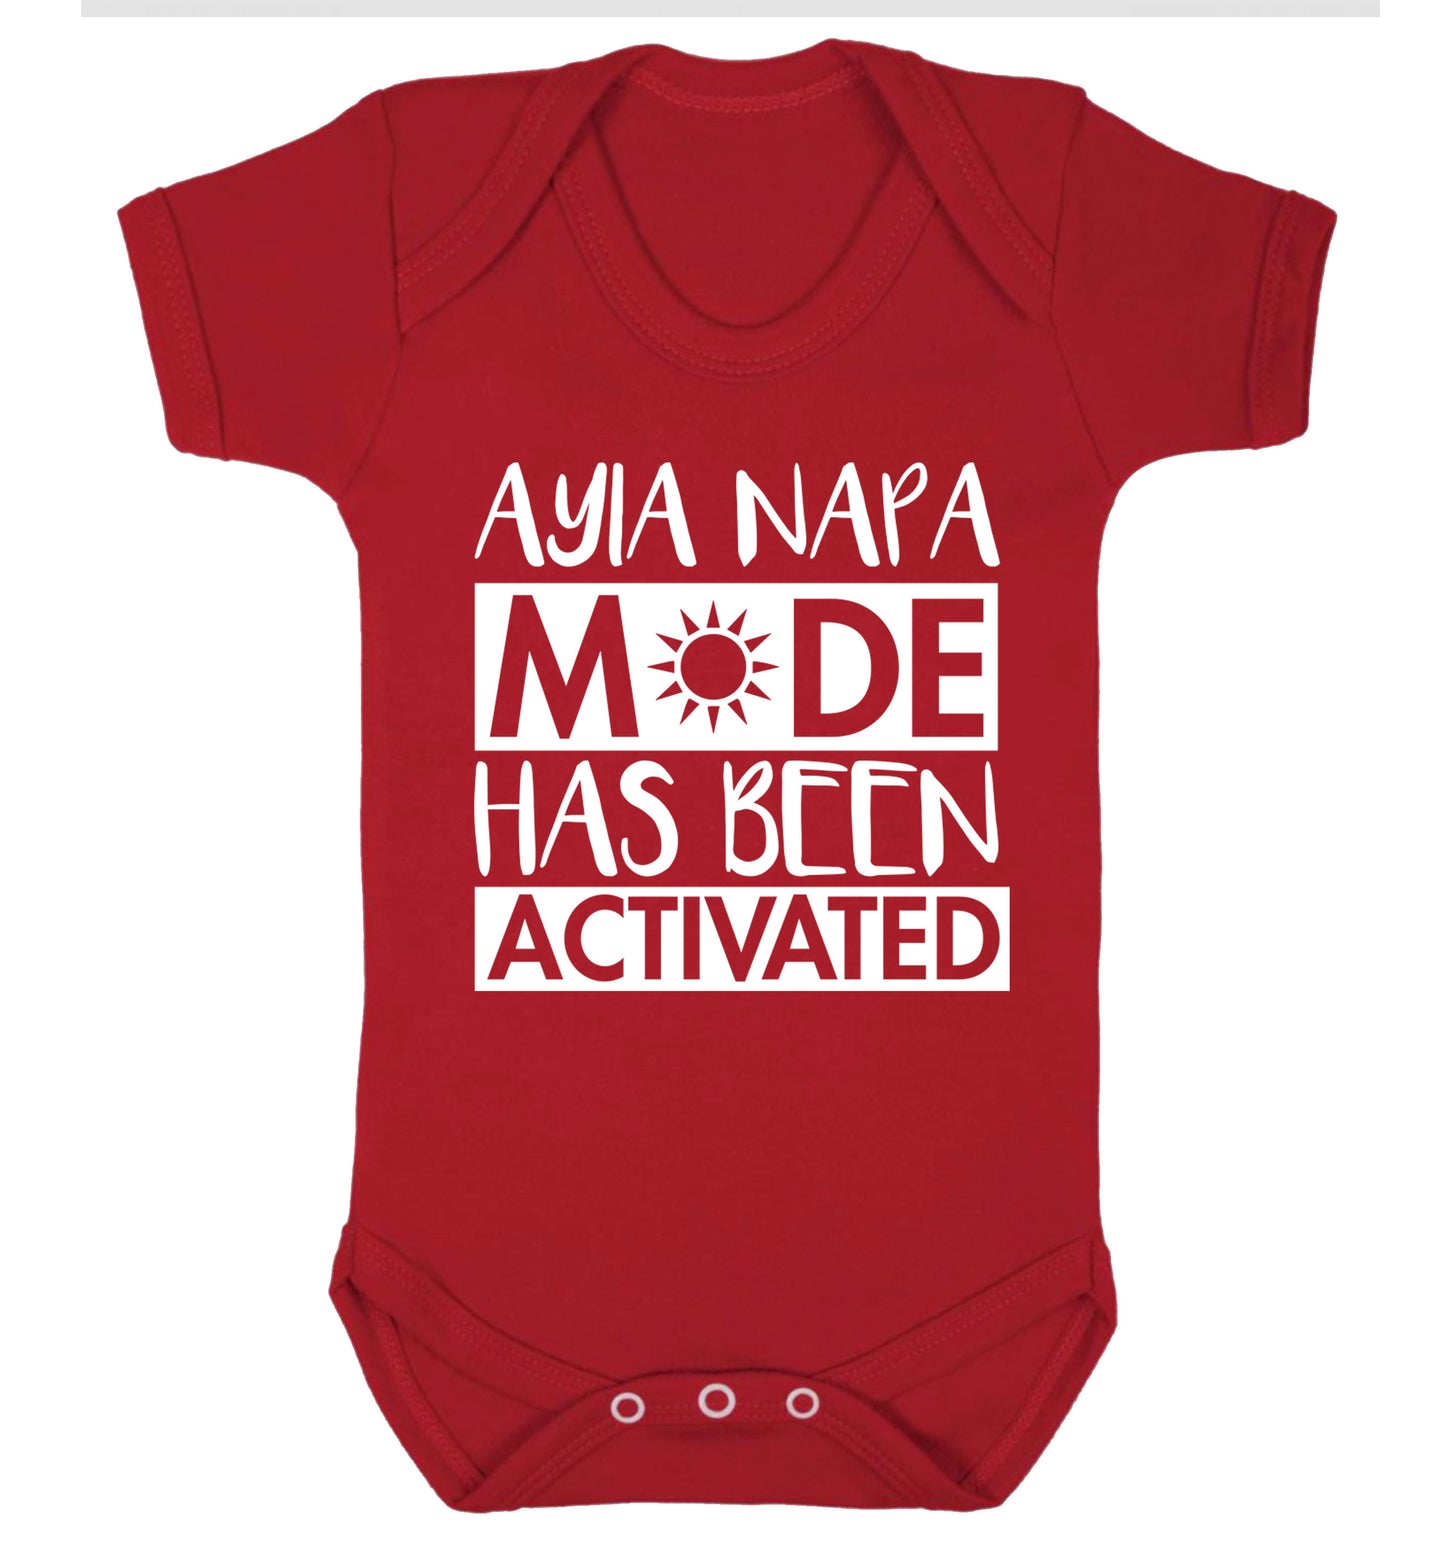 Aiya Napa mode has been activated Baby Vest red 18-24 months